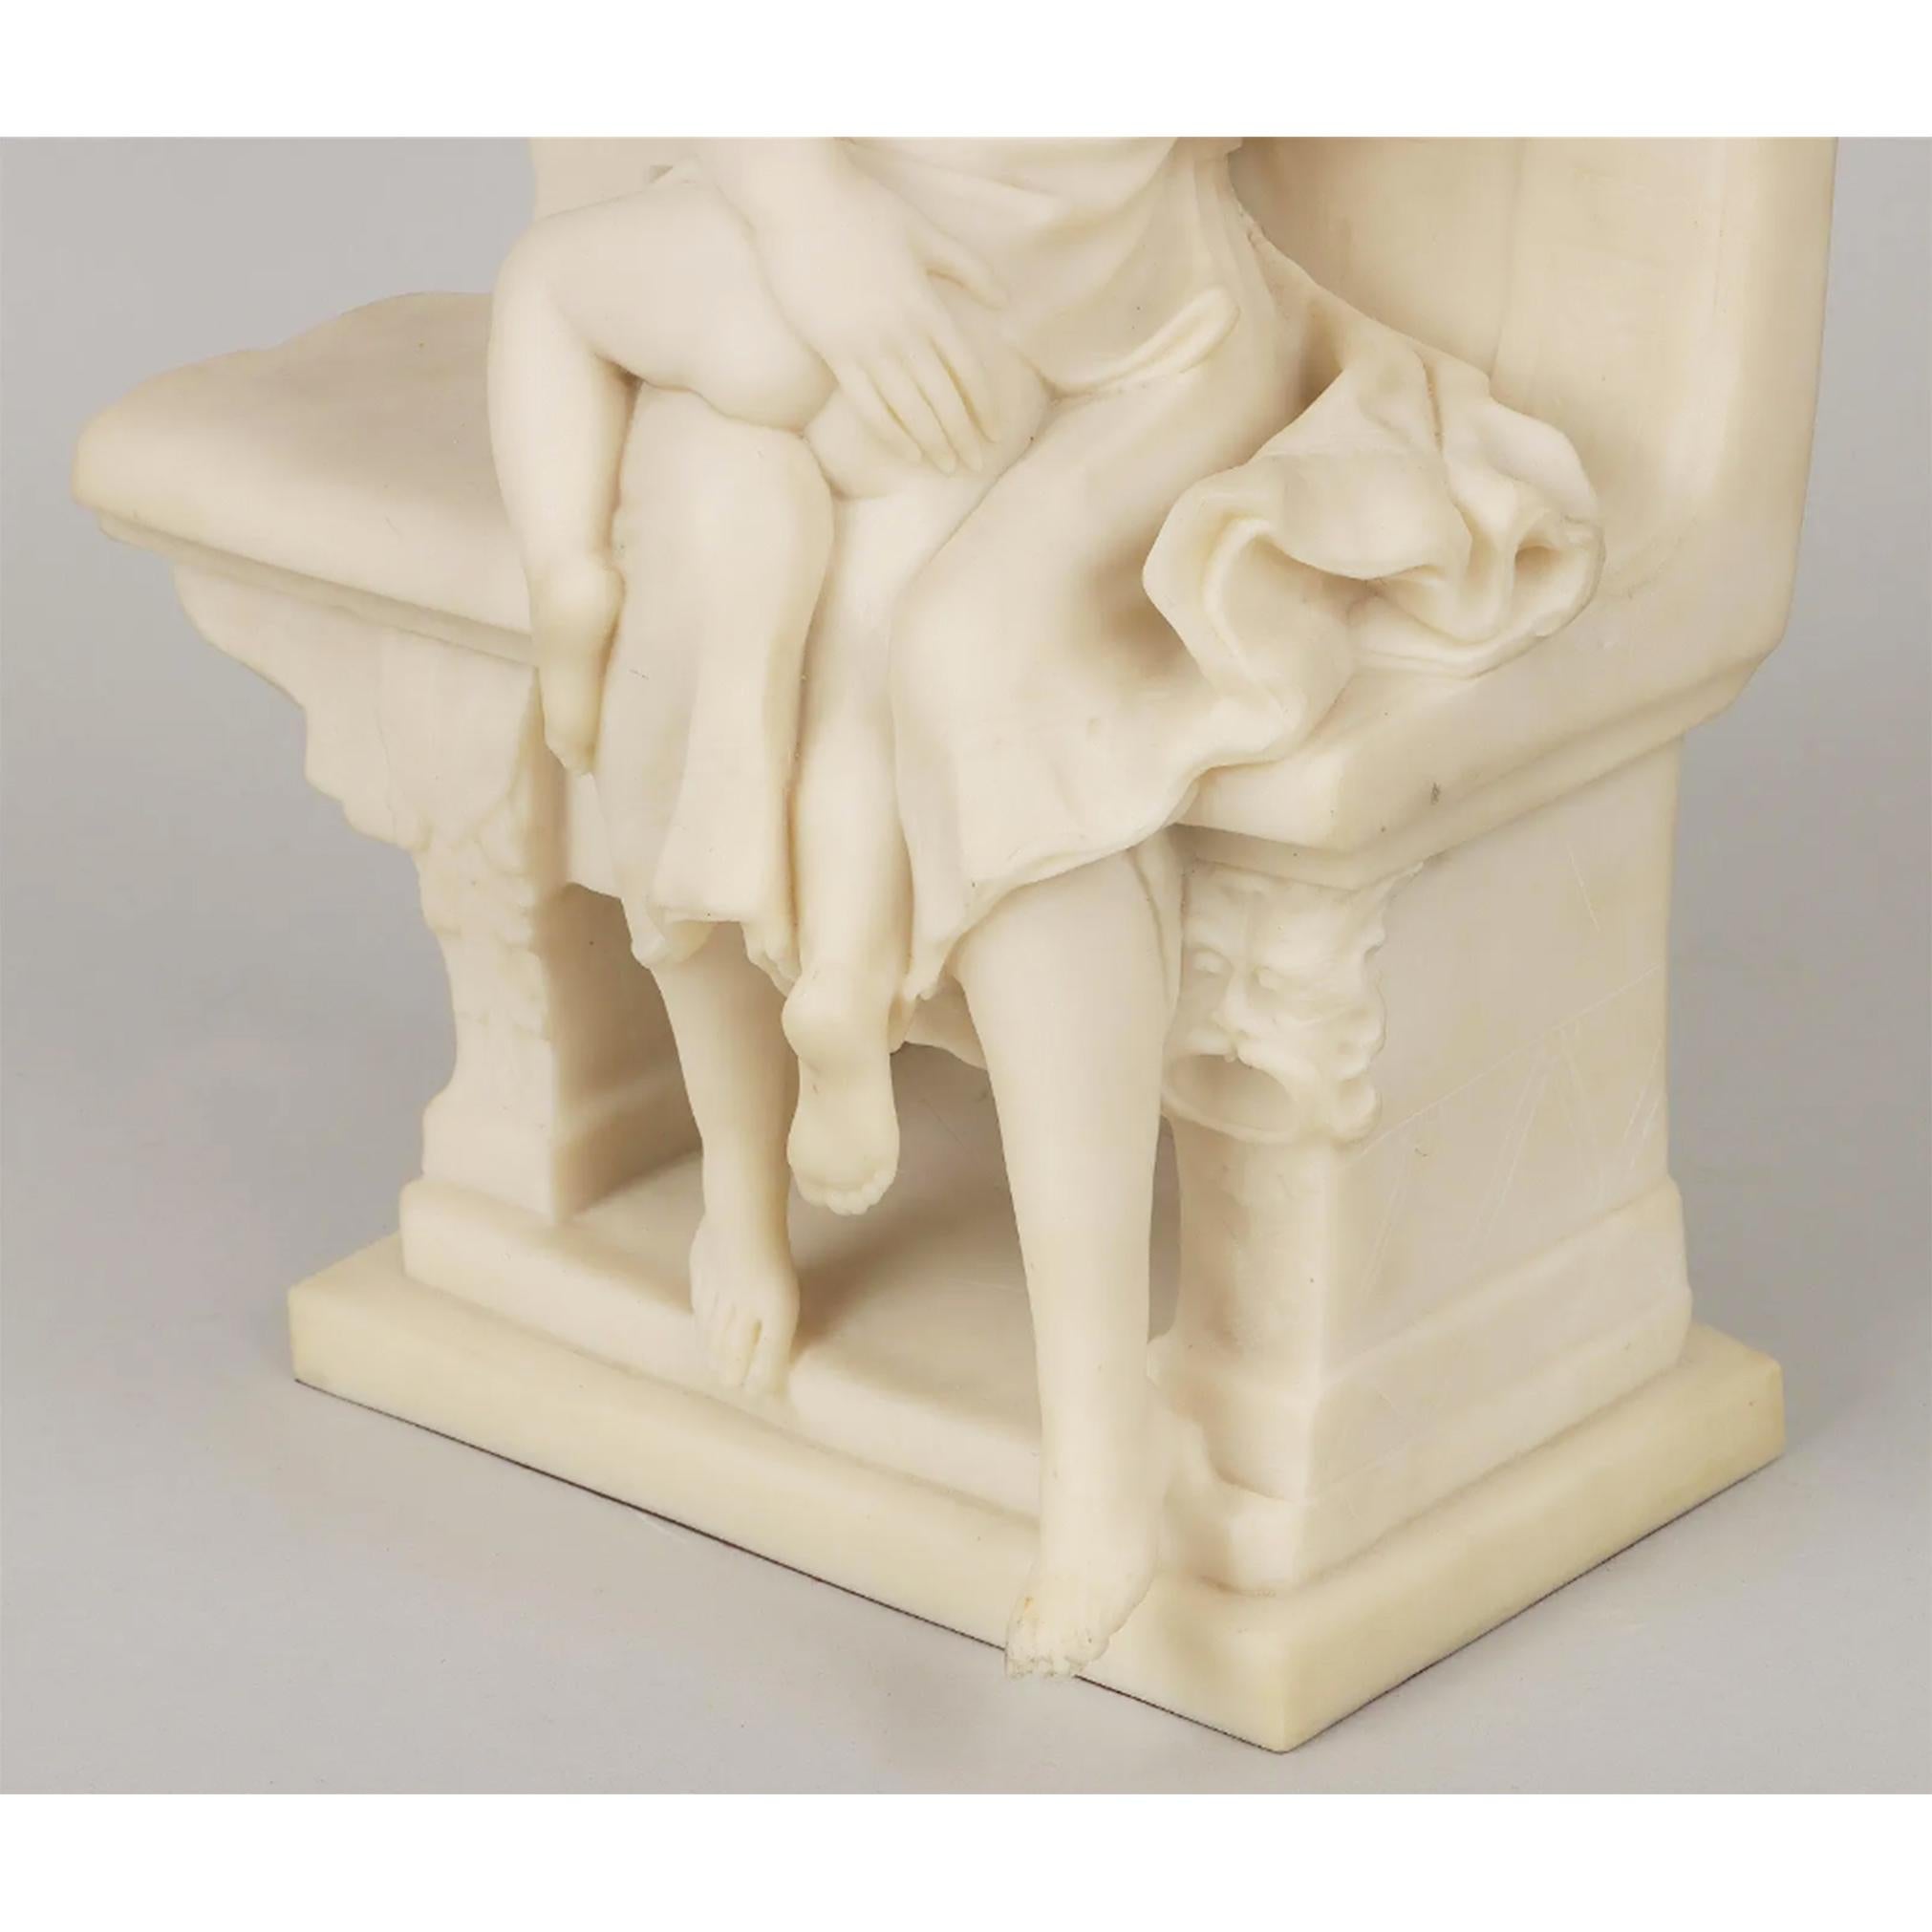 White Marble Statue of a Mother and Child by Antonio Frilli (Italian, 1860-1902) For Sale 4